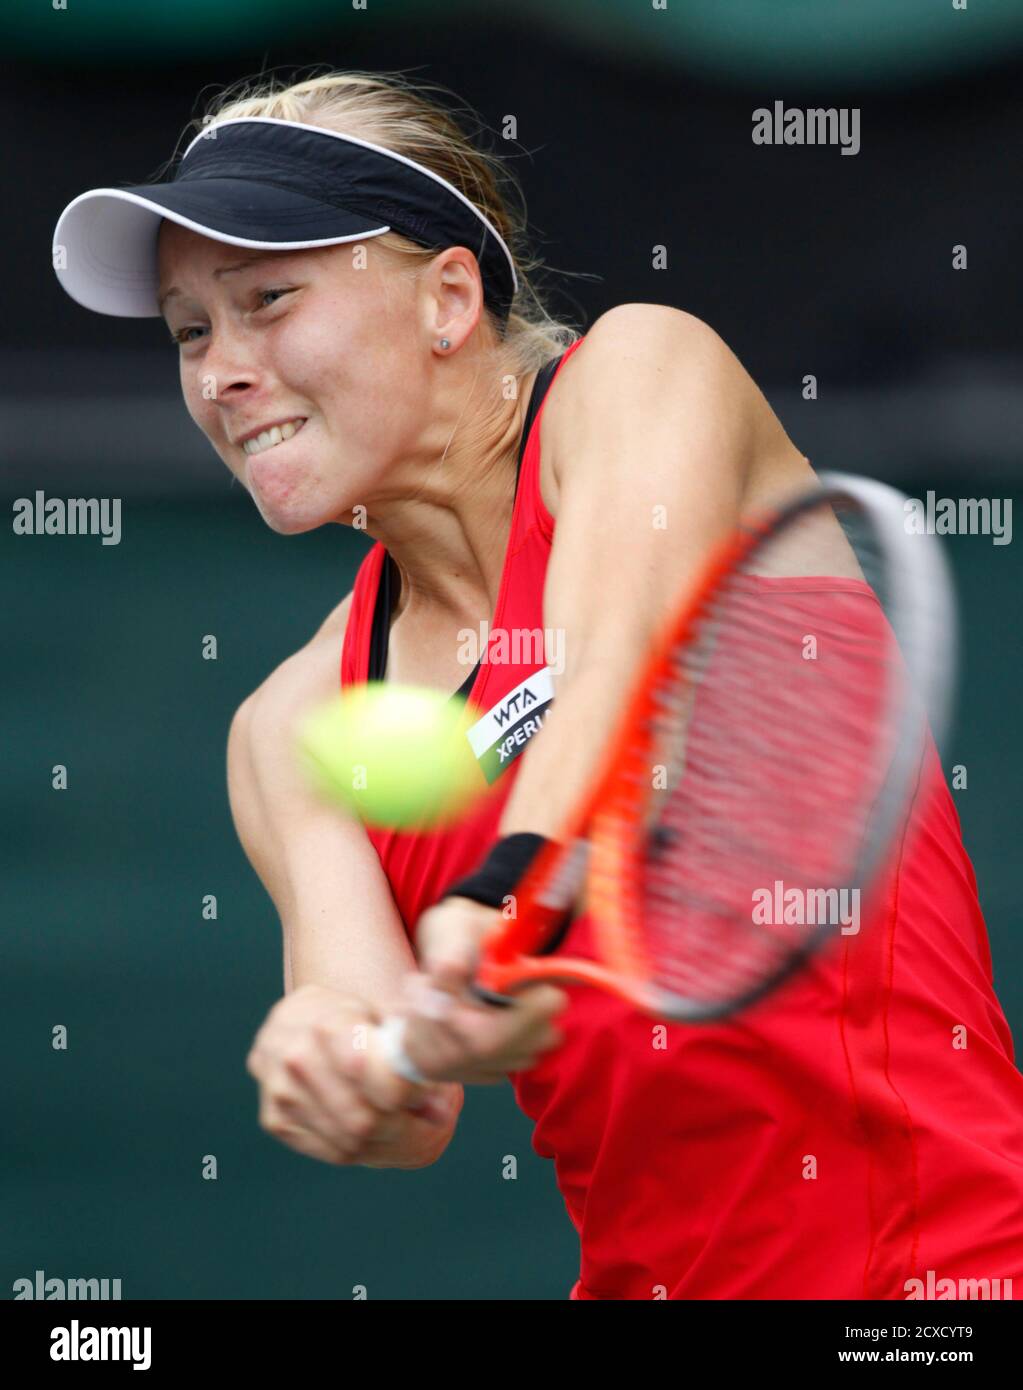 Johanna Larsson of Sweden returns the ball to Sara Errani of Italy during  their match at the Pan Pacific Open tennis tournament in Tokyo September  25, 2012. REUTERS/Yuriko Nakao (JAPAN - Tags: